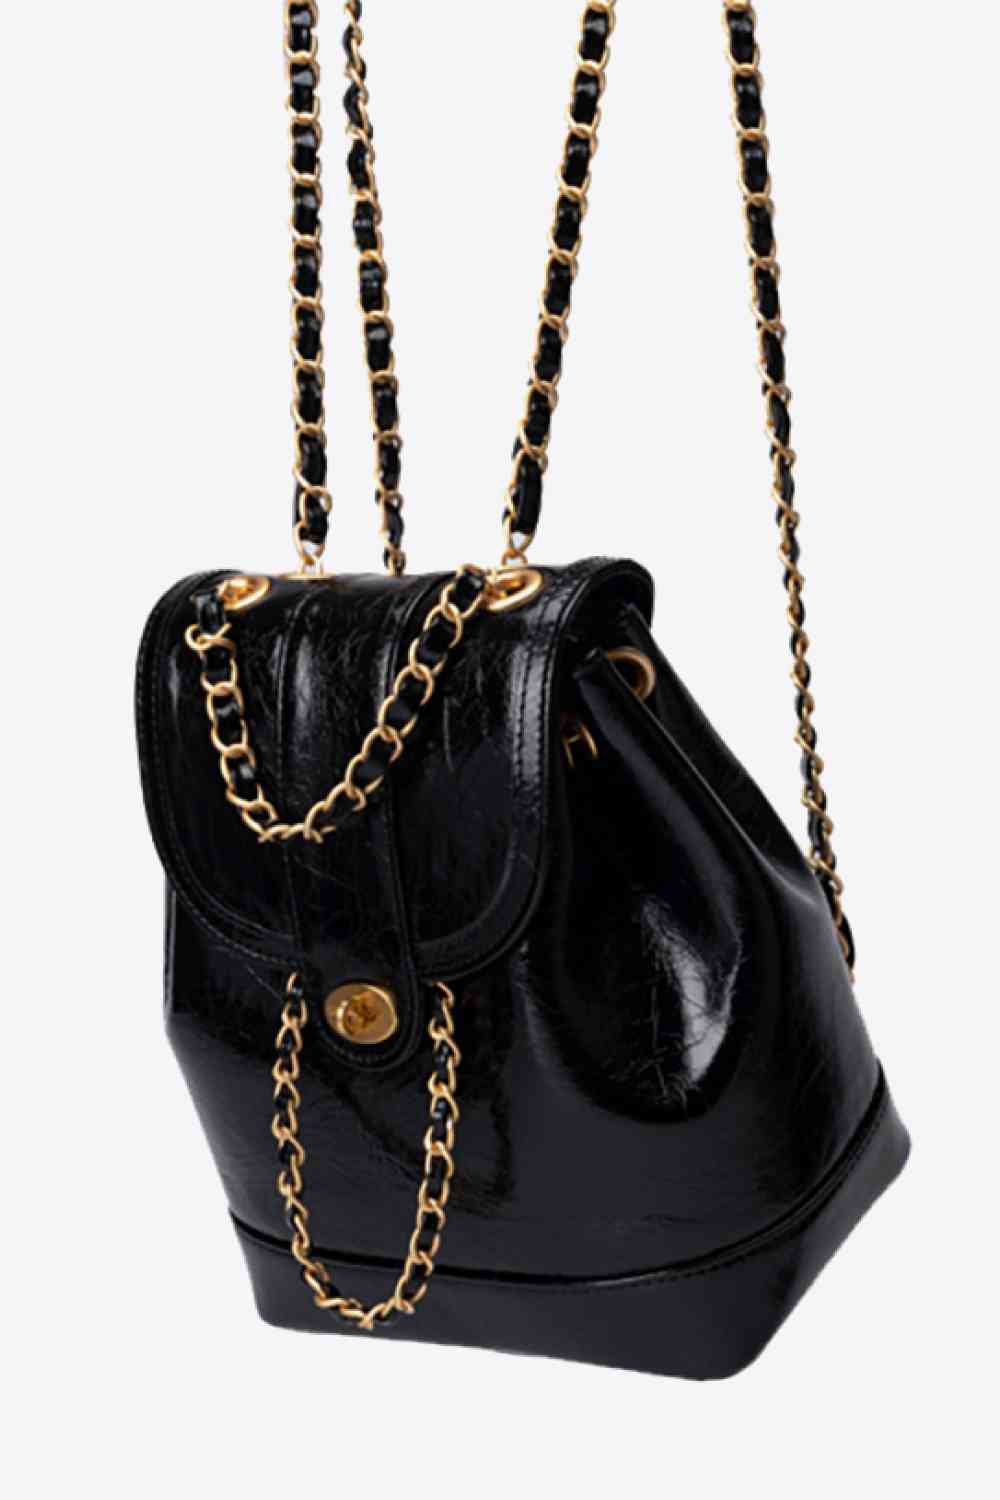 Adored PU Leather Backpack Black One Size